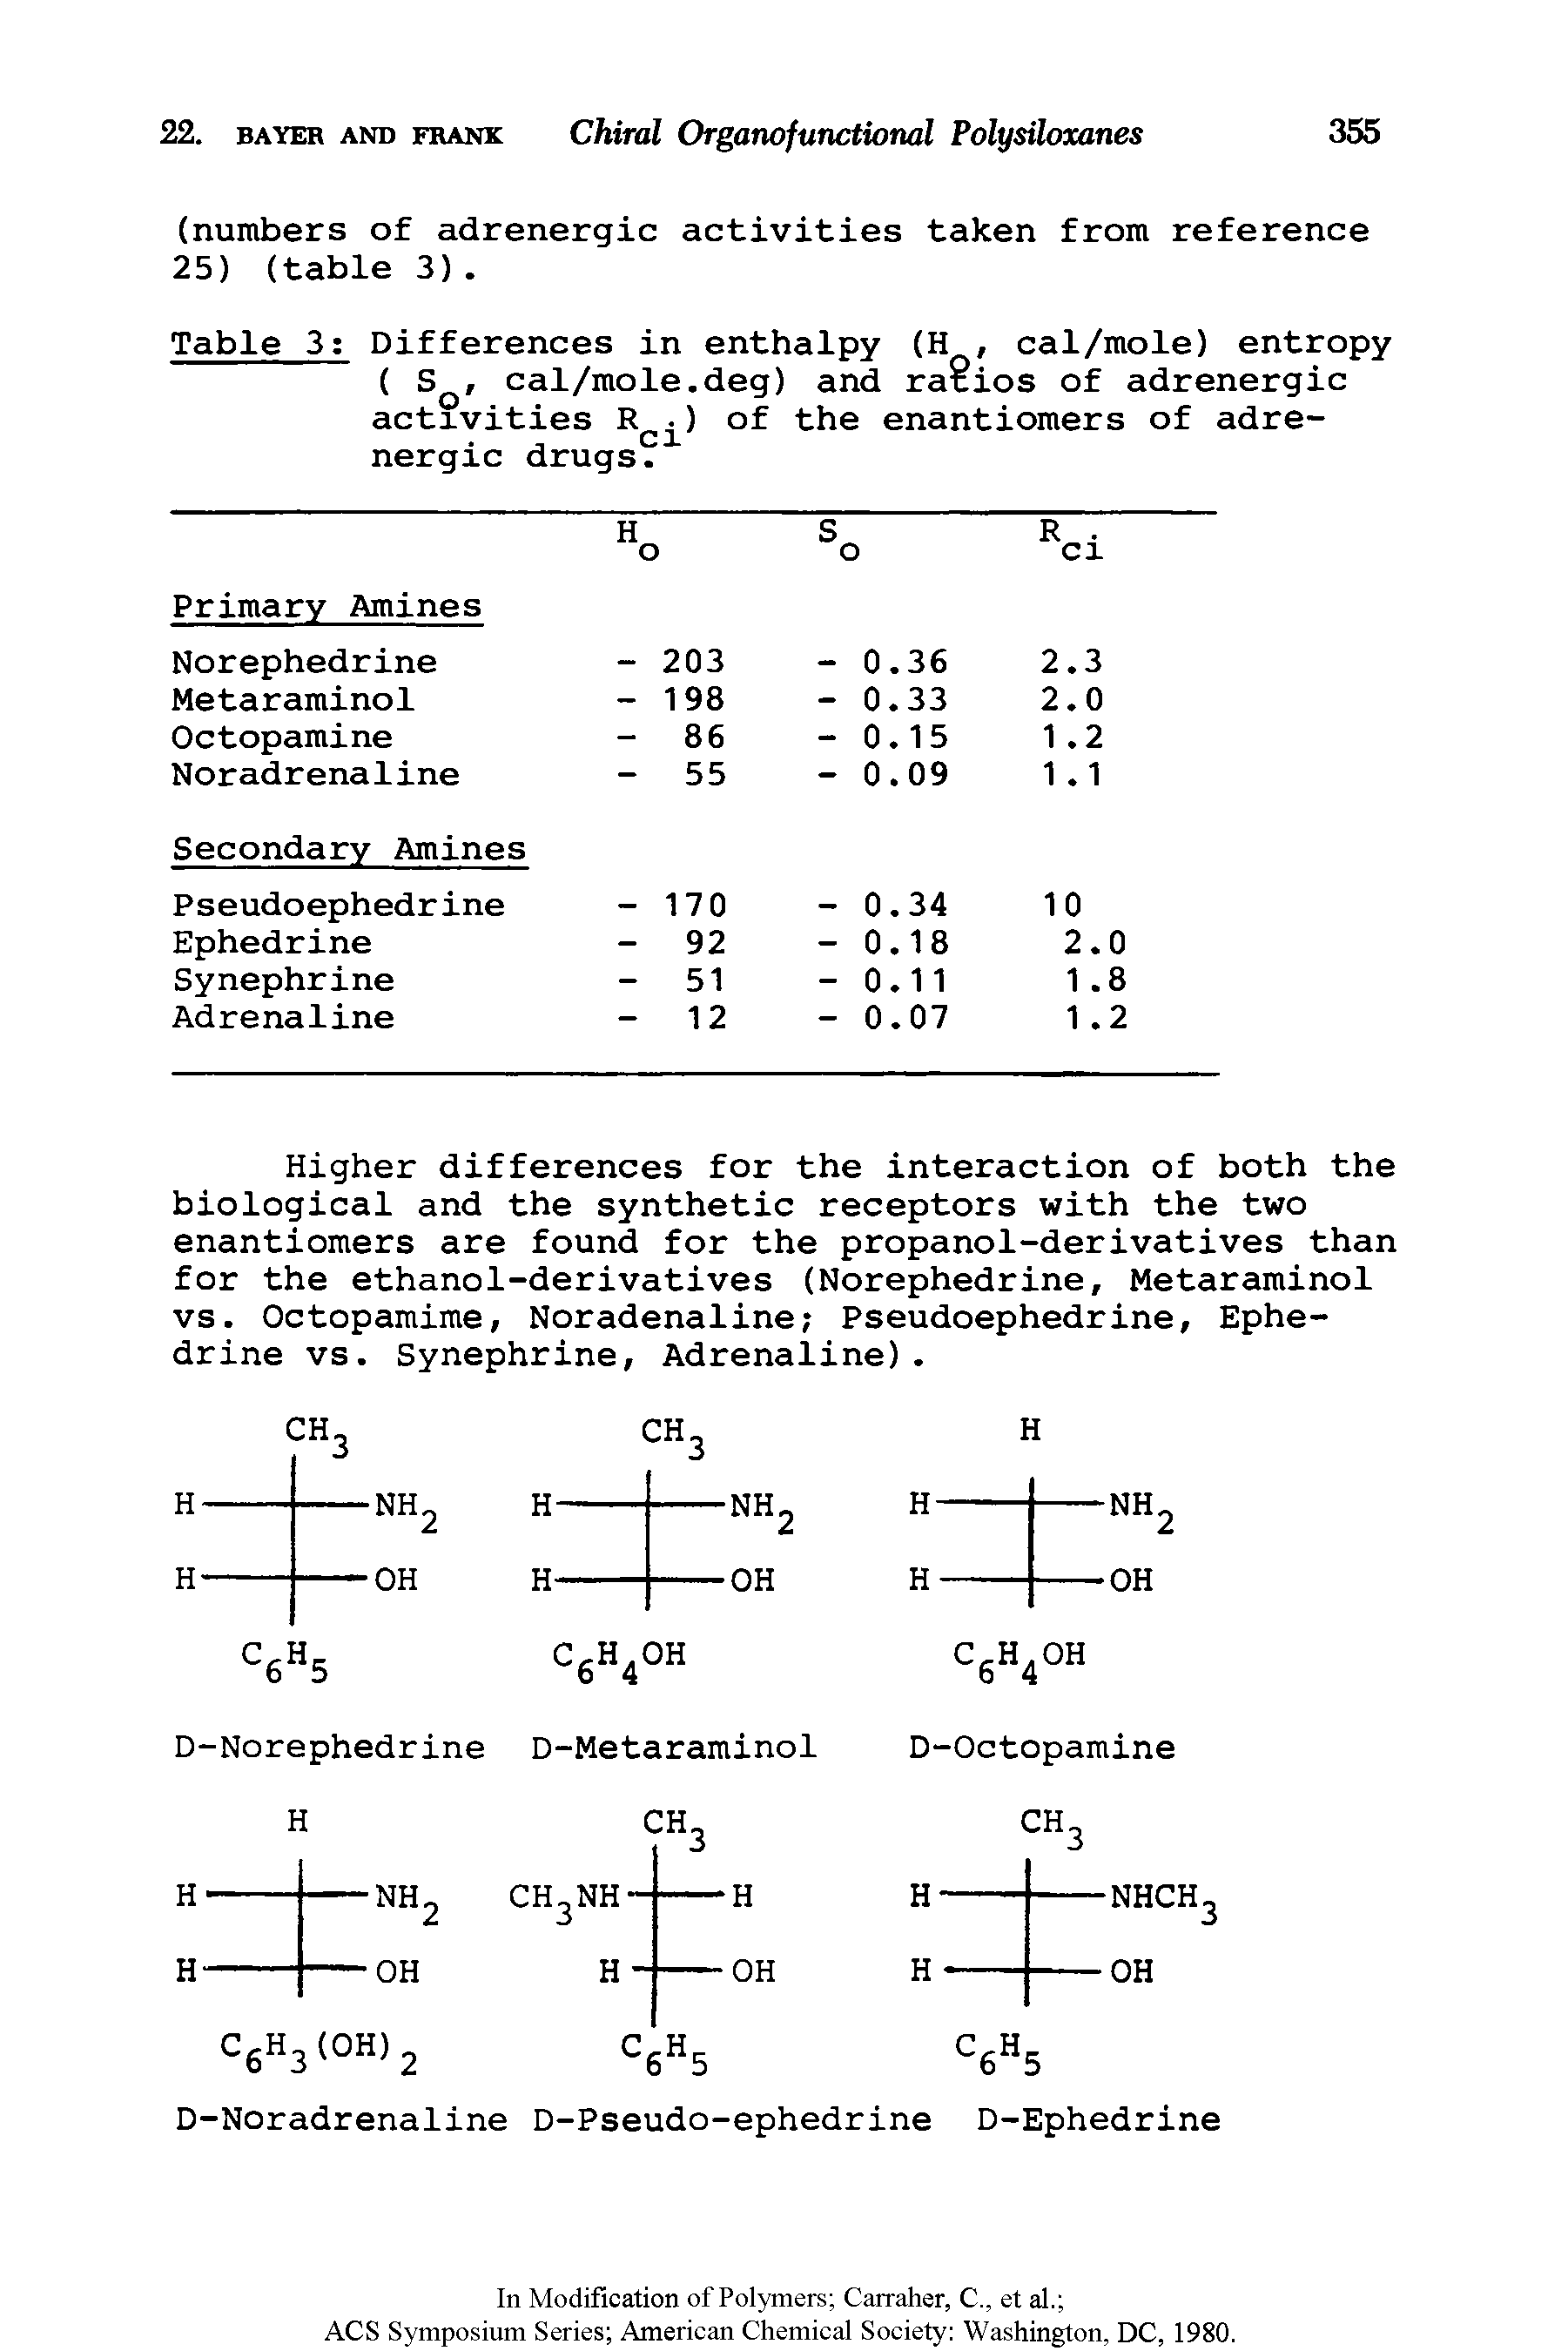 Table 3 Differences in enthalpy (H, cal/mole) entropy ( SQ, cal/mole.deg) and ratios of adrenergic activities Rc ) of the enantiomers of adrenergic drugs.